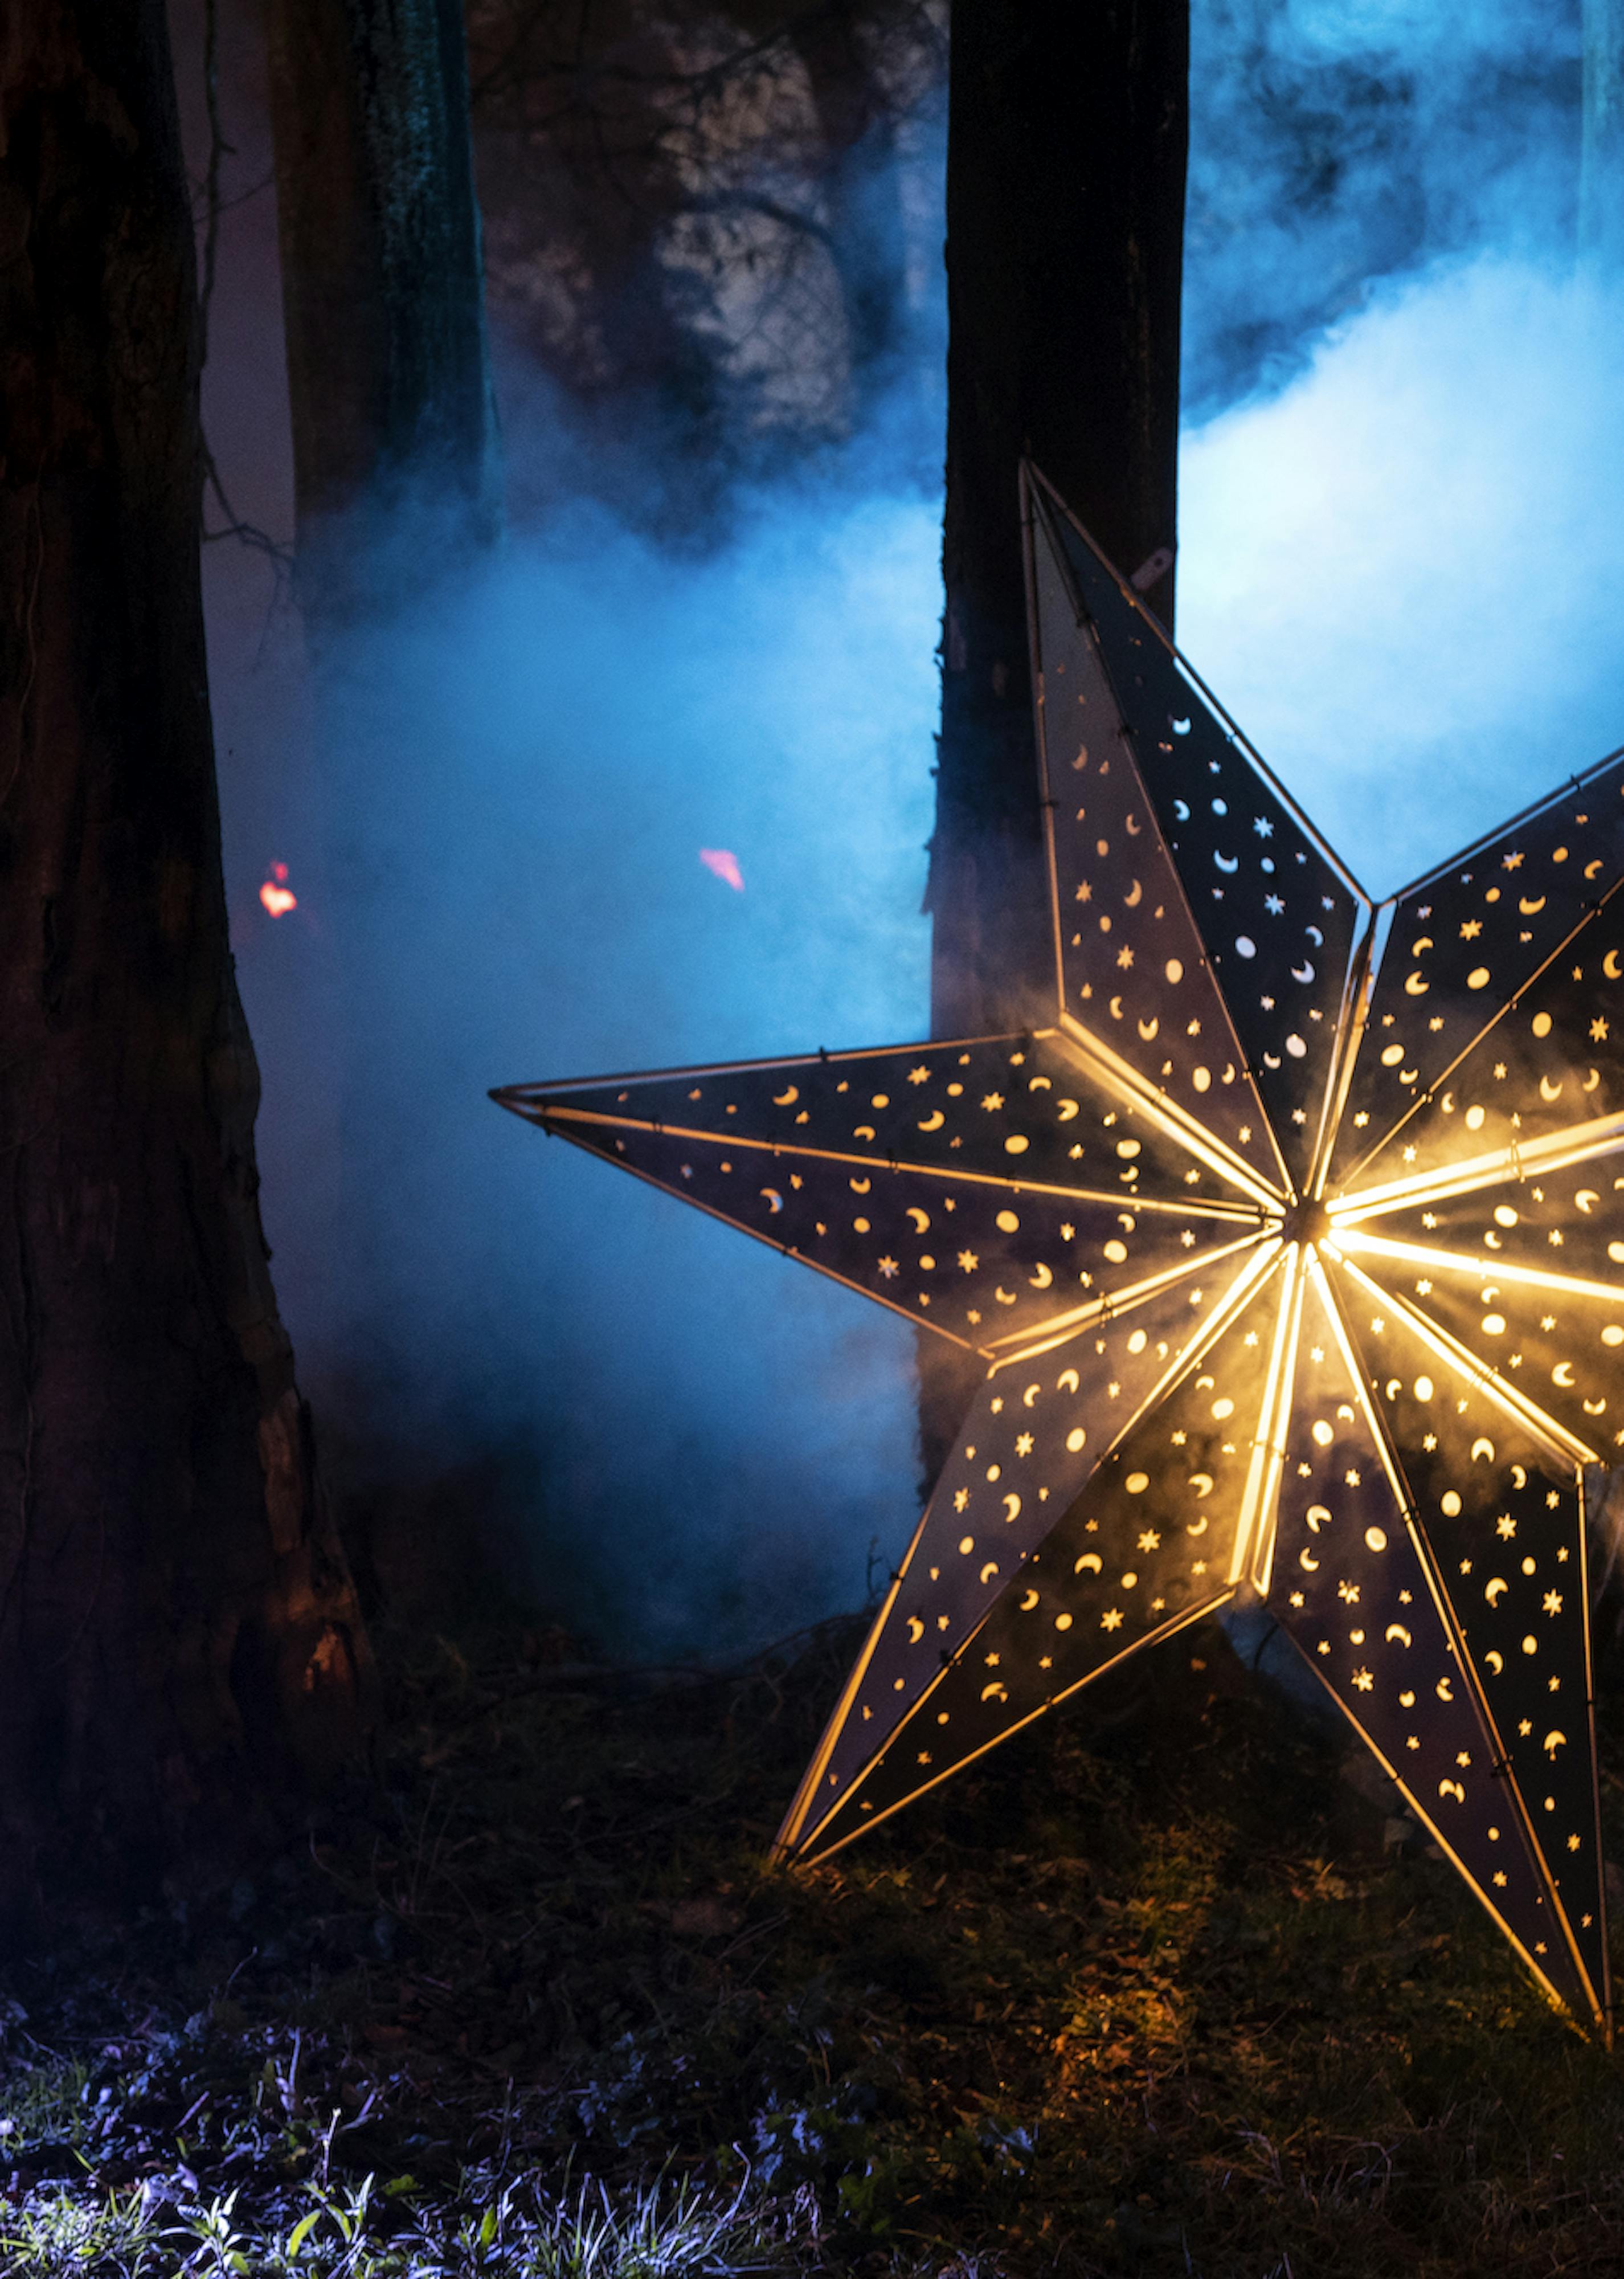 Two stars structures that light up from within in a woodland area, lit up by blue lighting and smoke